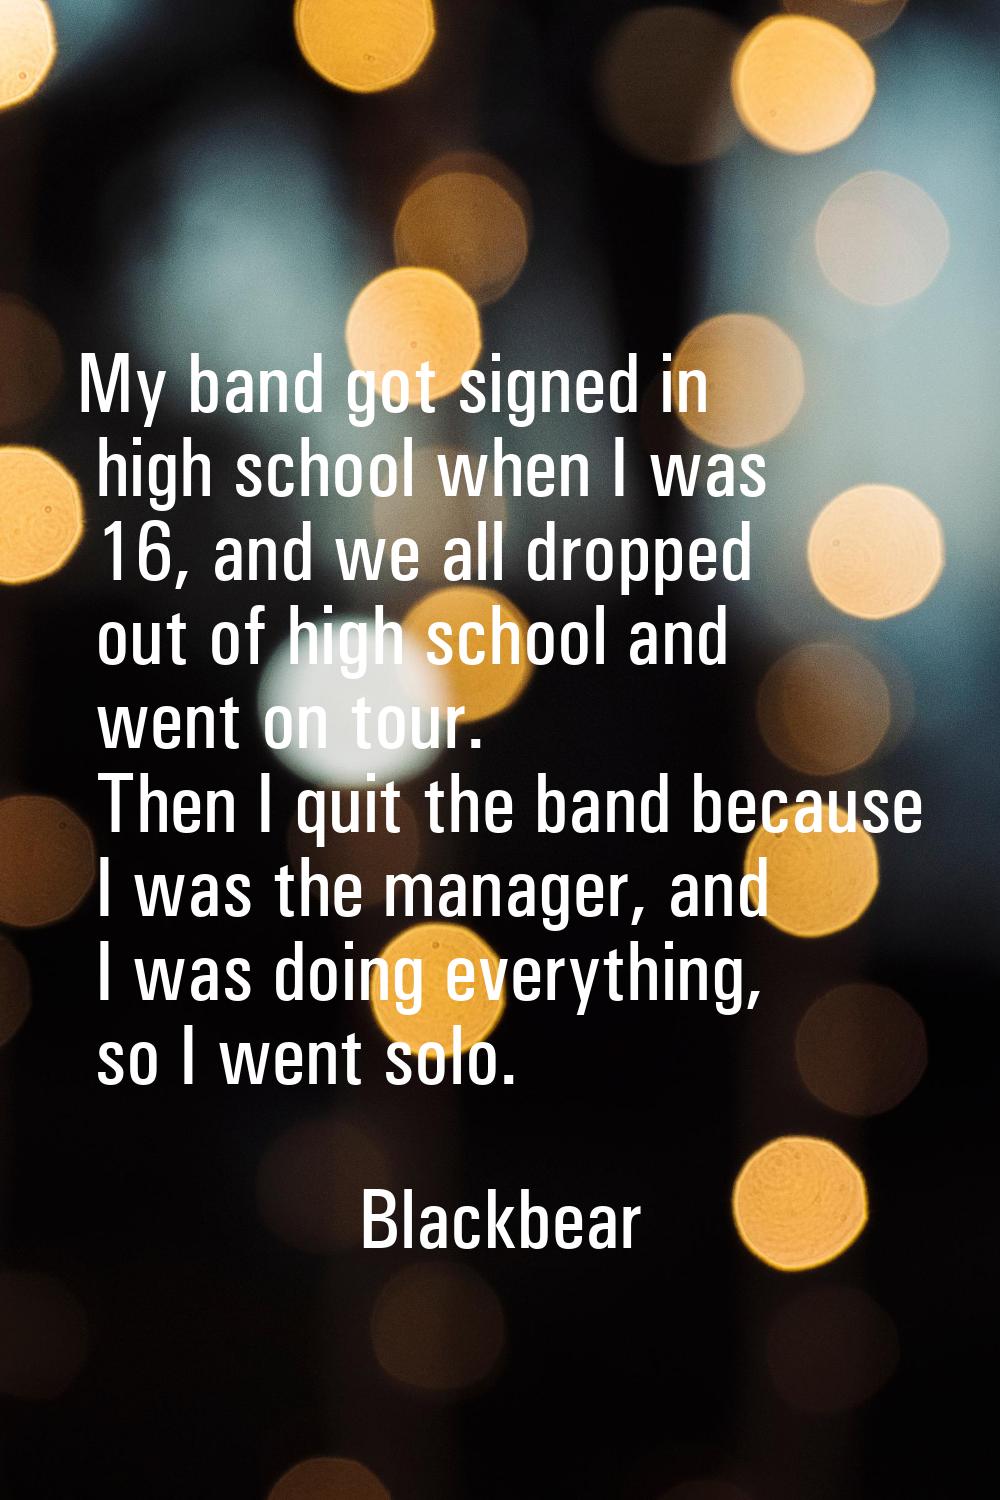 My band got signed in high school when I was 16, and we all dropped out of high school and went on 